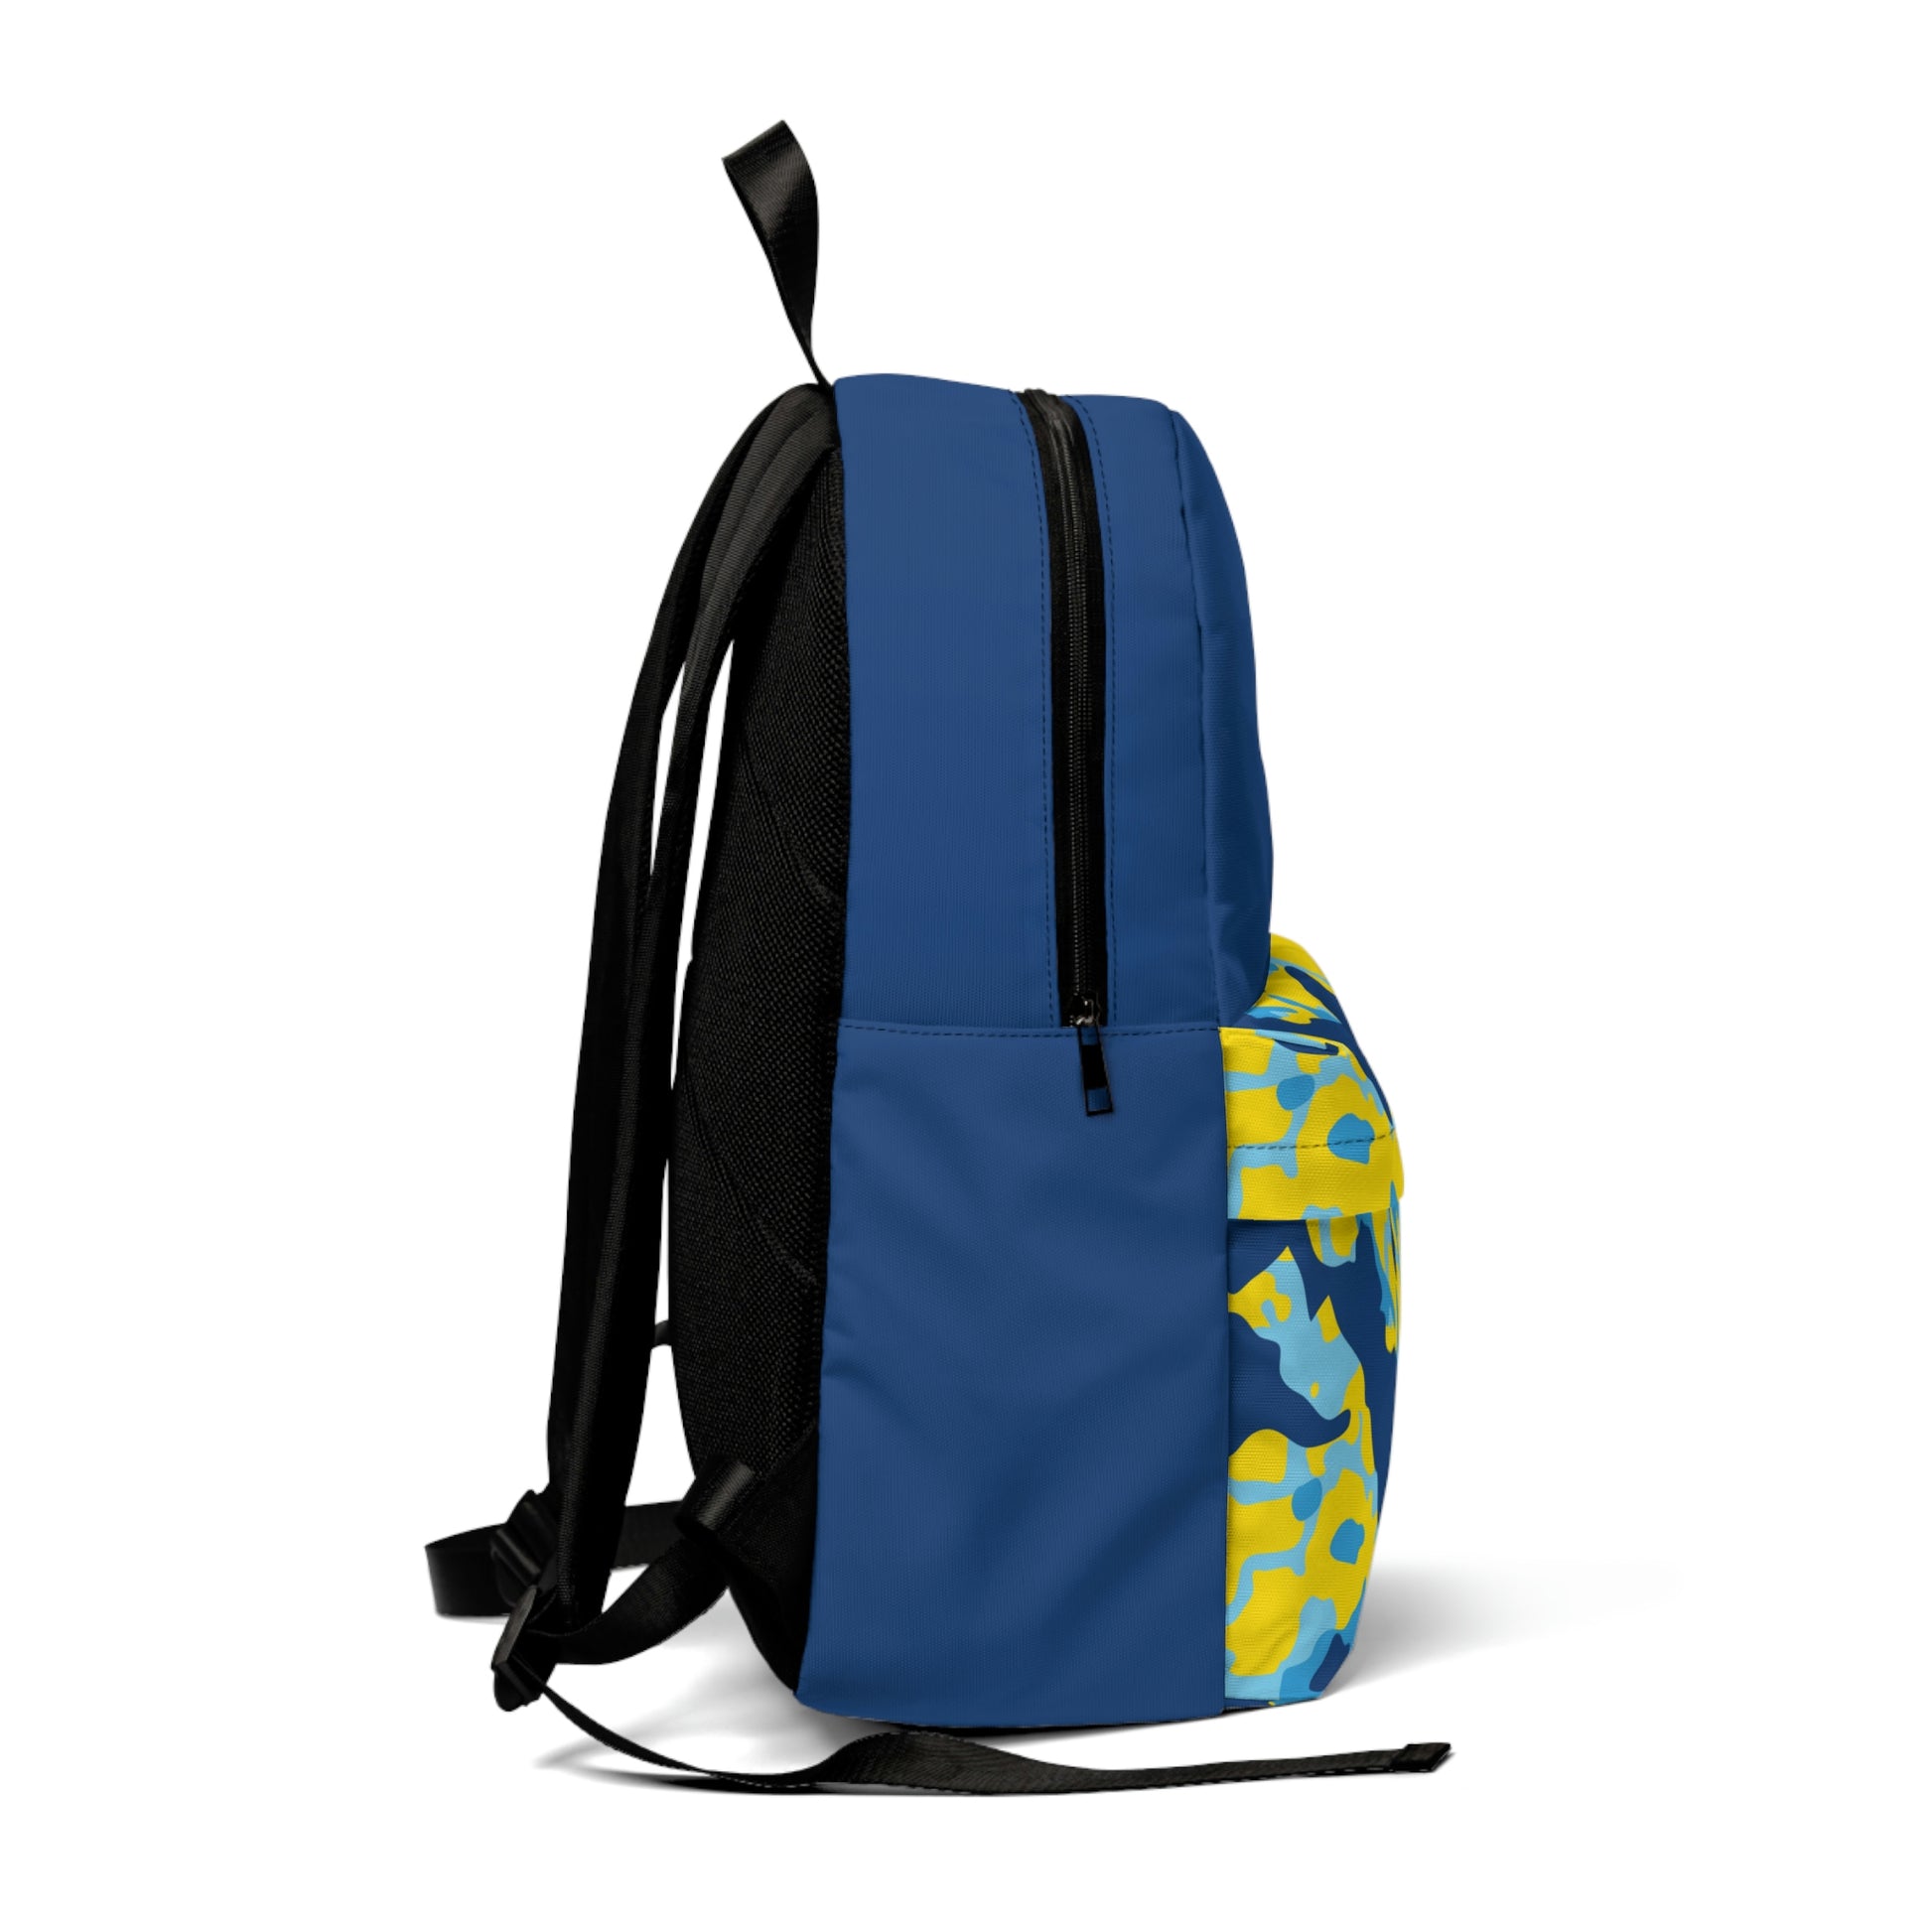 Dark blue backpack with "Duntalk" print written in yellow on the large pocket. Camouflage in yellow, dark blue, blue and light blue on the smaller pocket. Black covering the backside where the straps are.